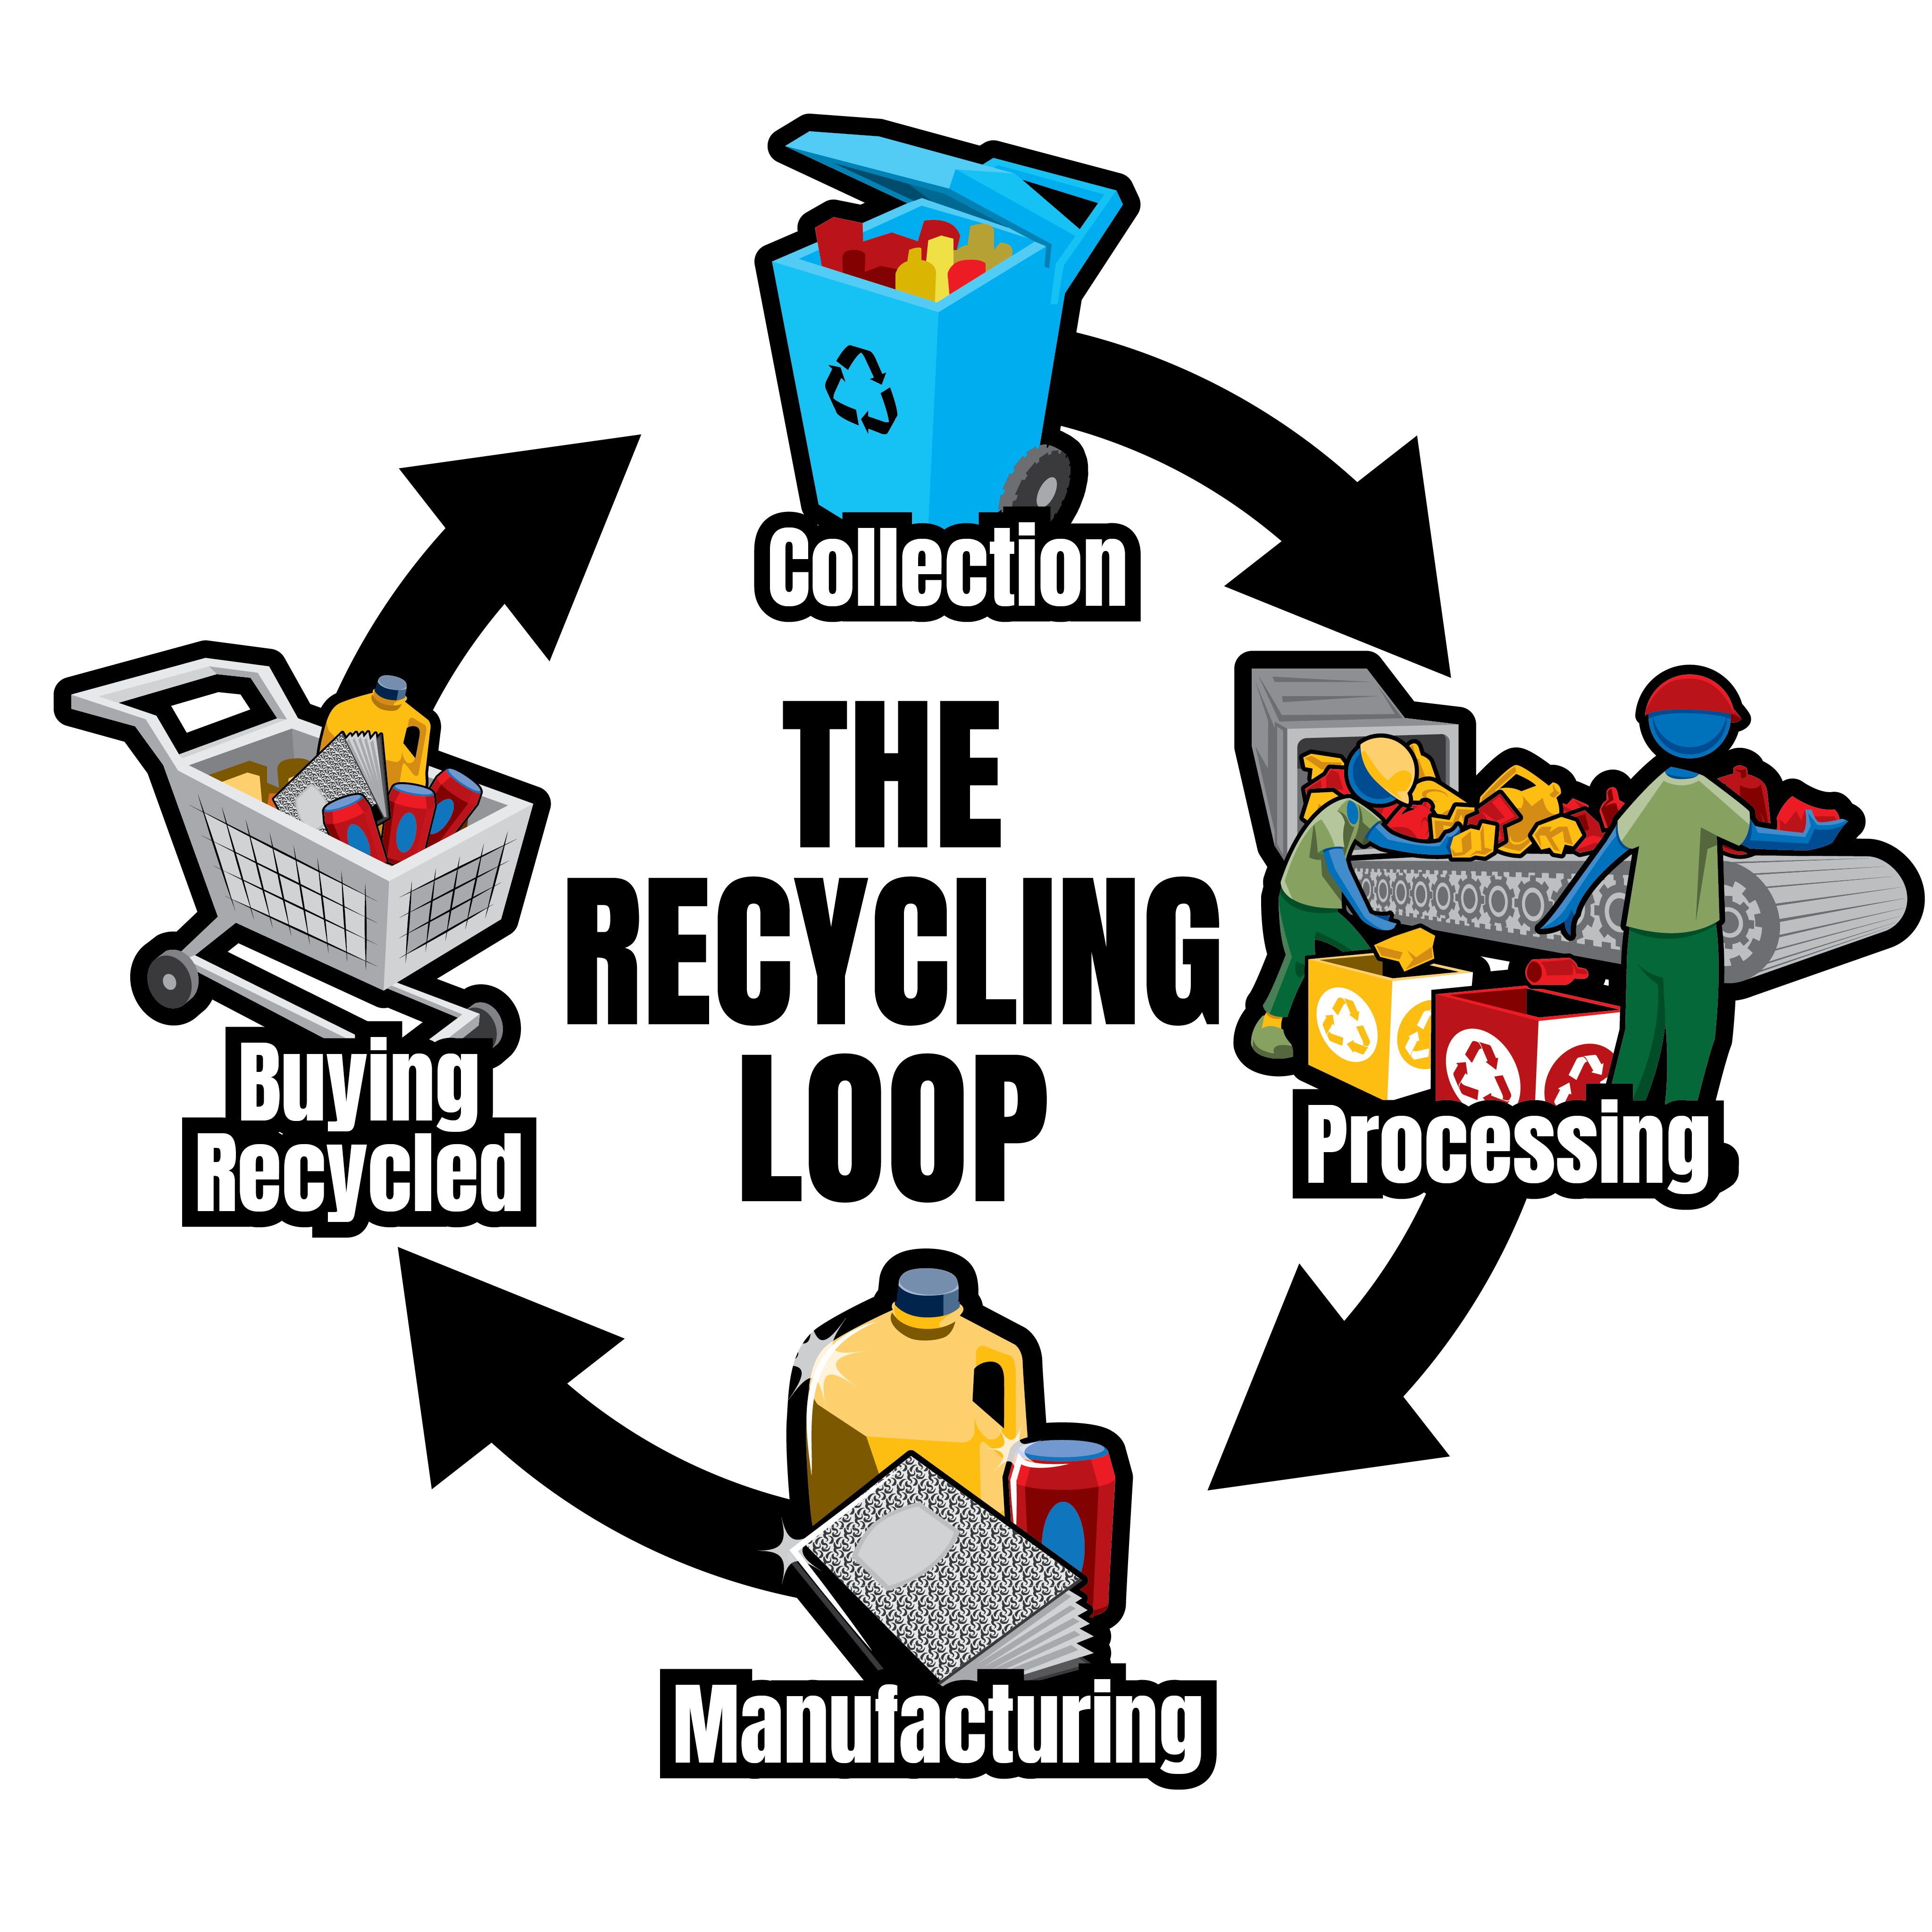 Recycled Paper Manufacturing Process 